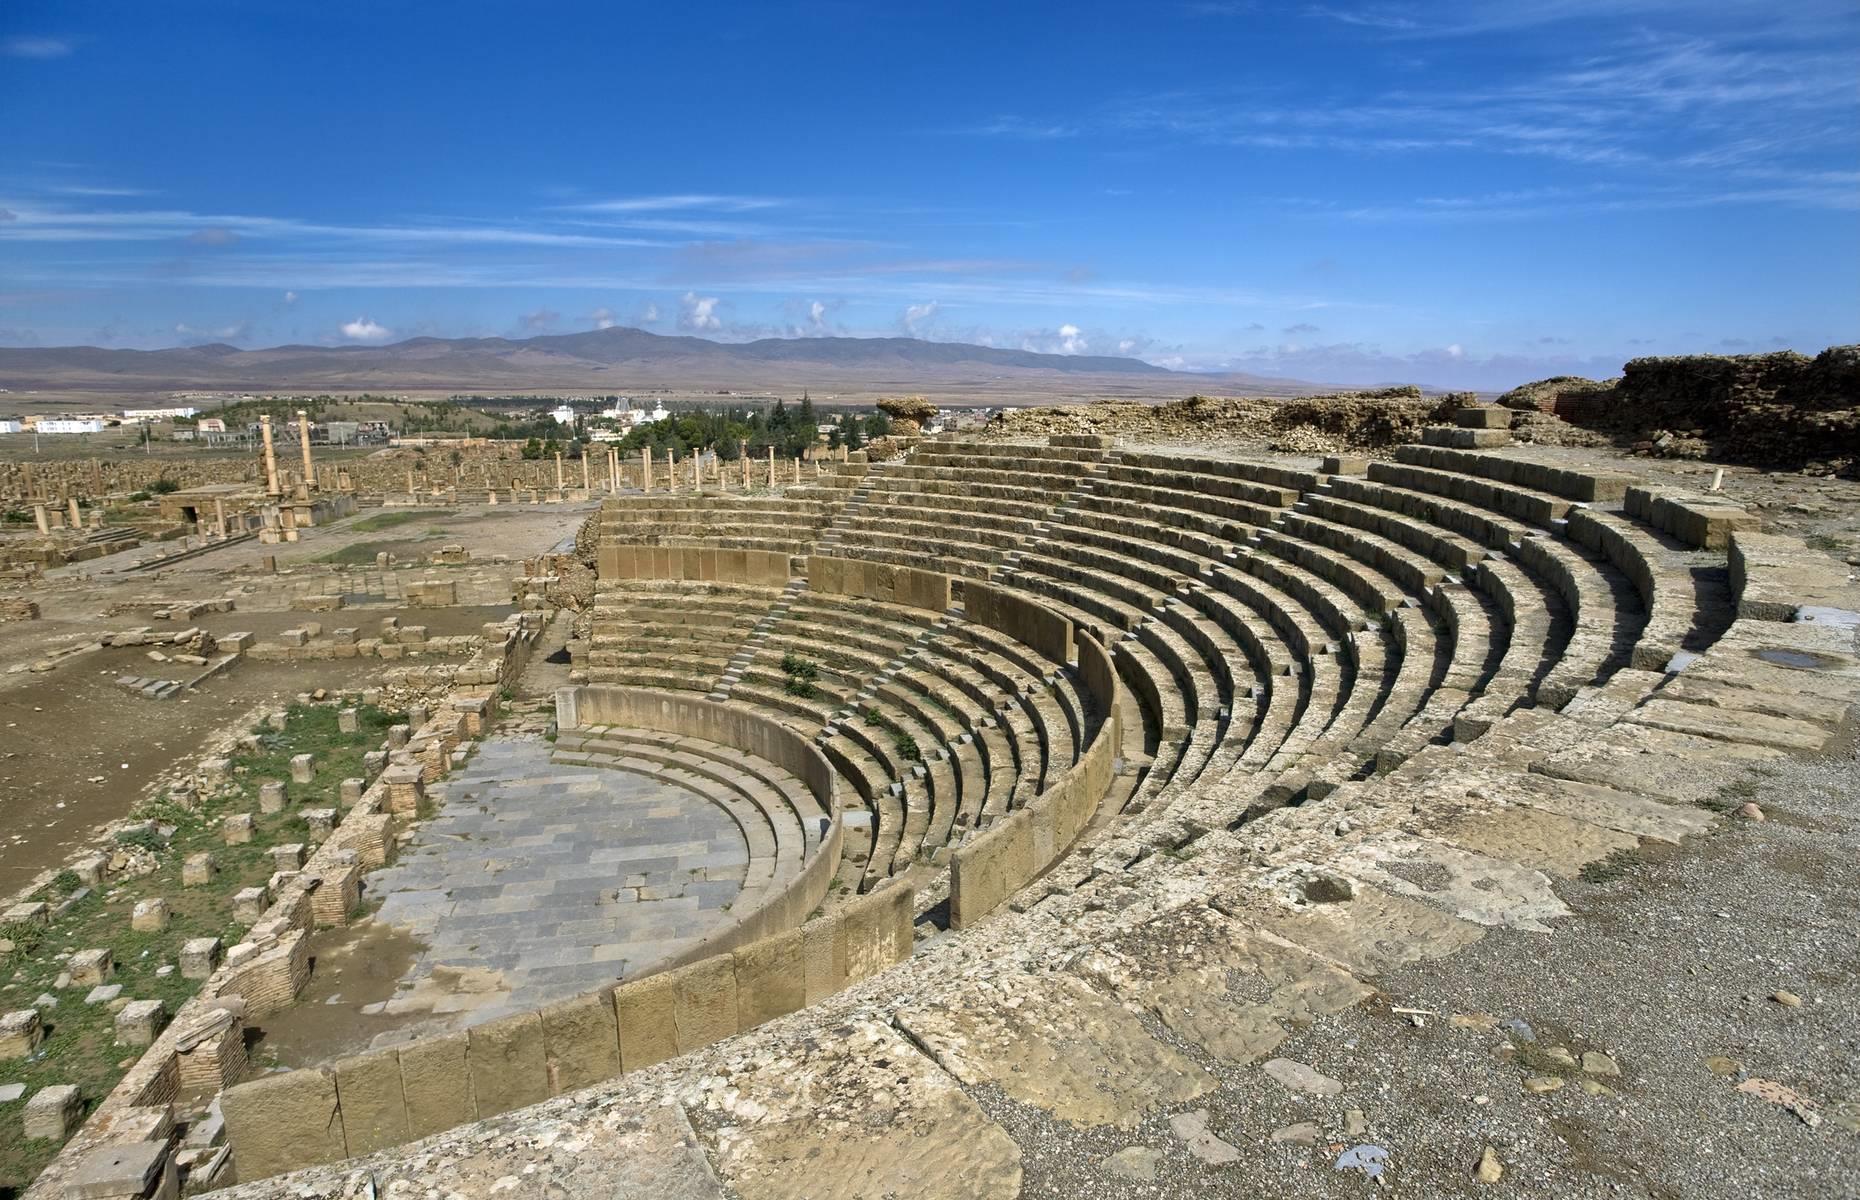 Slide 7 of 30: The city’s enormous 3,500-seat amphitheater is largely intact. The library, which dates from the 3rd or 4th century AD, is thought to have once been stocked with around 3,000 papyrus rolls. In the 5th century, the city was sacked by the Vandals and went into decline and abandonment. The Scottish explorer James Bruce then came upon the ruins in late 1765, buried in the desert. Discover more of the world's lost cities that have been rediscovered.